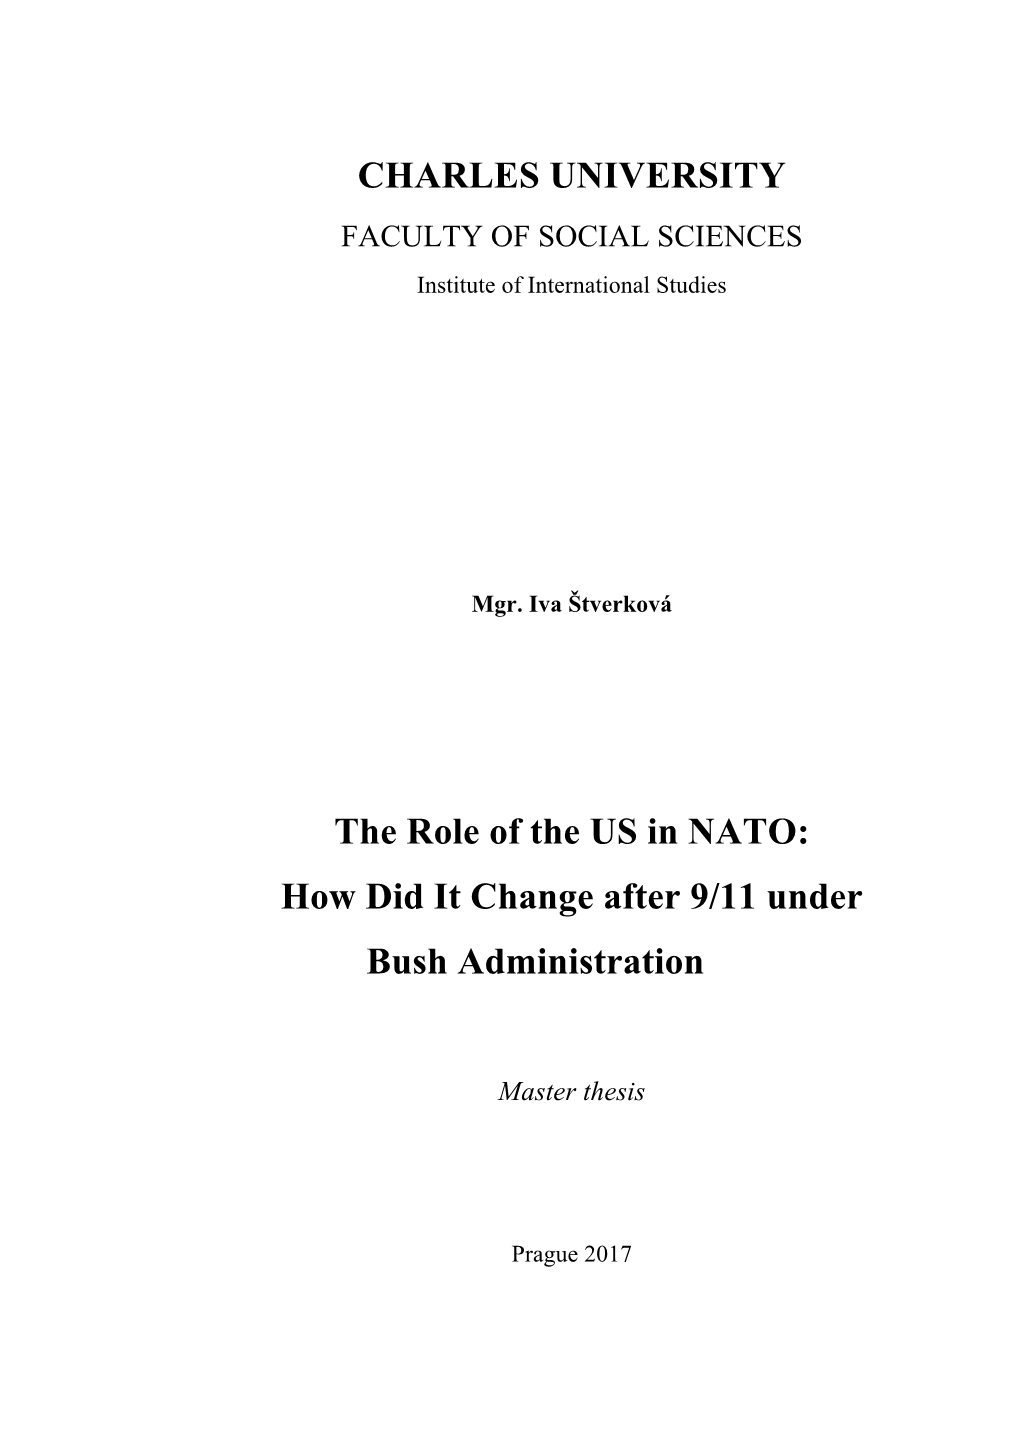 CHARLES UNIVERSITY the Role of the US in NATO: How Did It Change